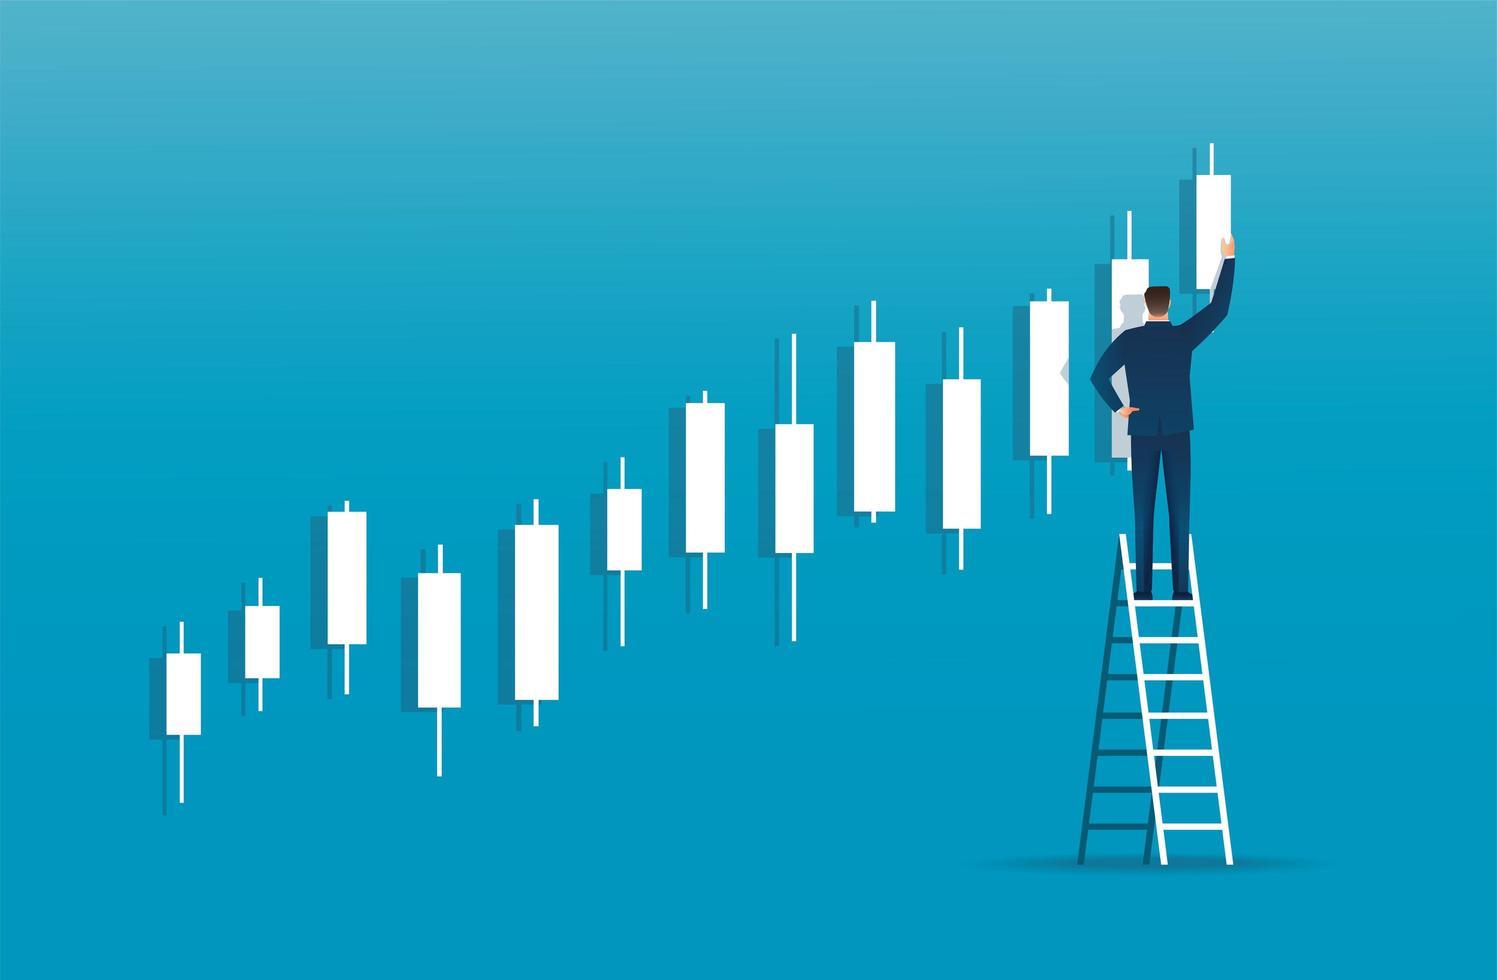 Man on ladder with candlestick chart vector